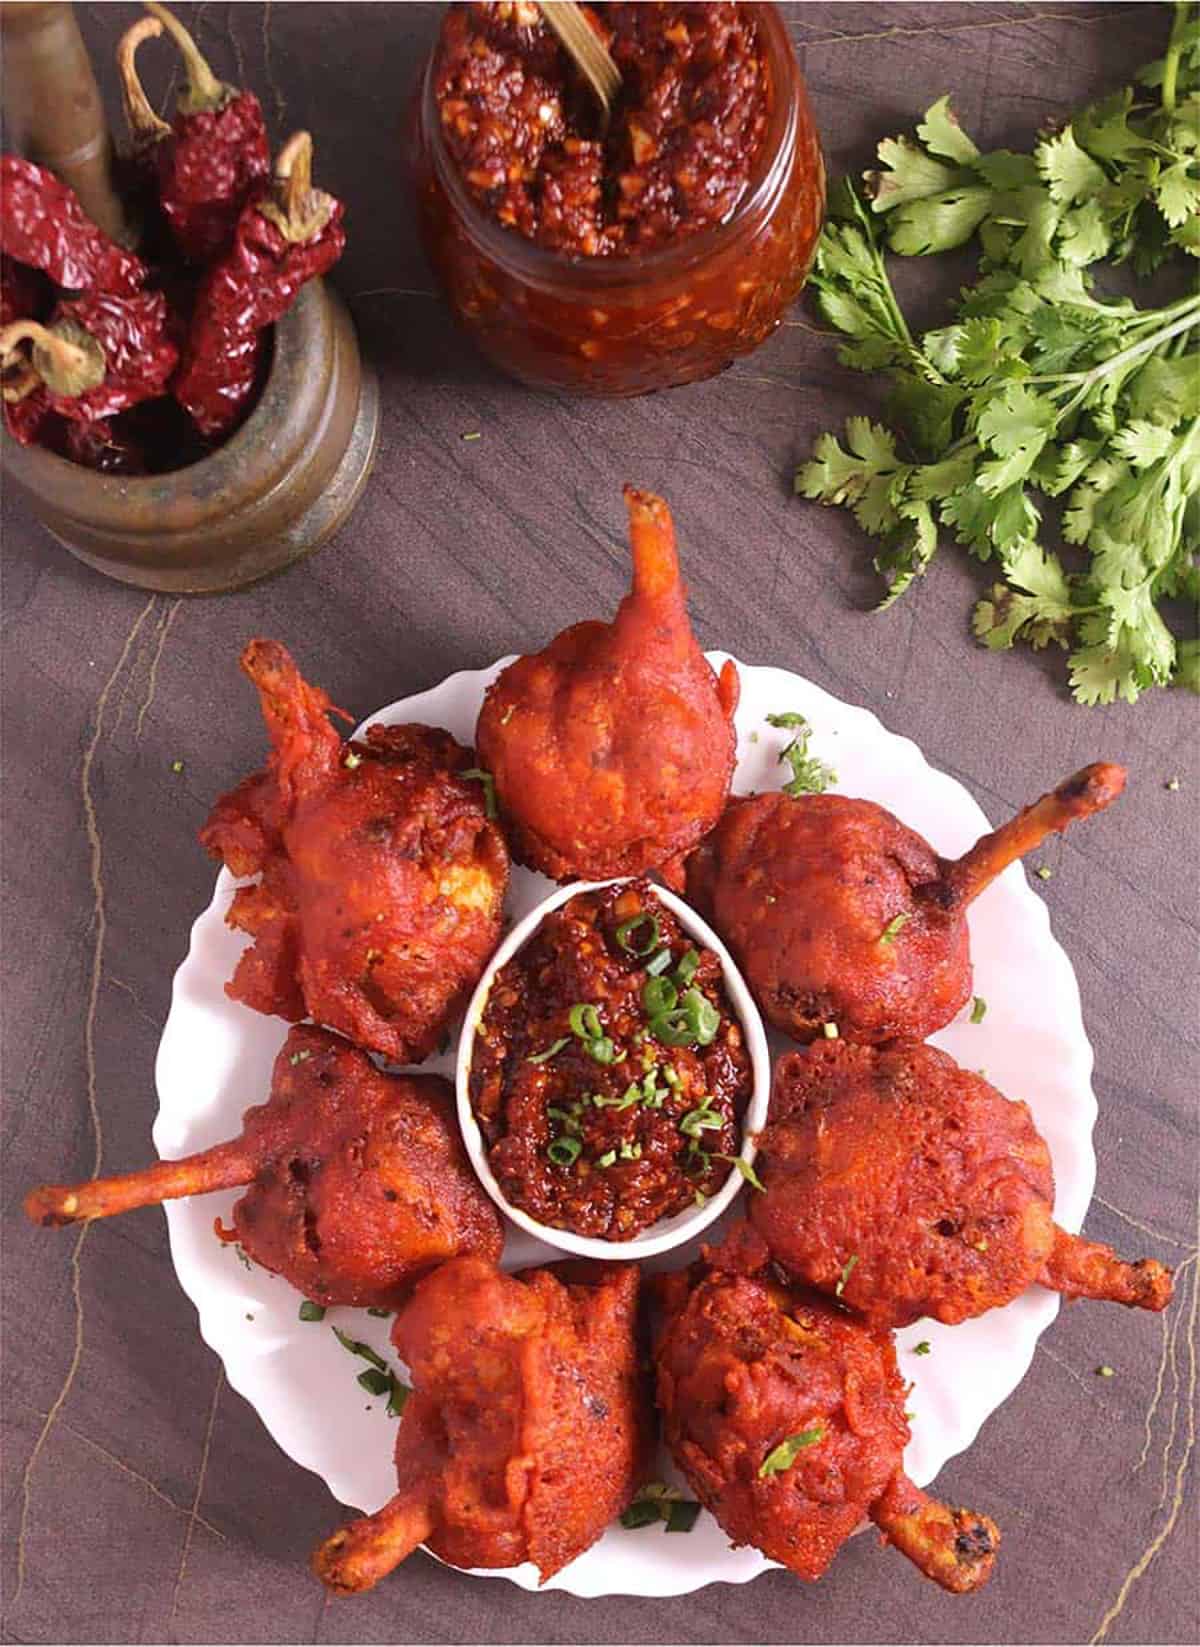 Restaurant-style crispy and juicy chicken lollipop served with spicy szechuan sauce.